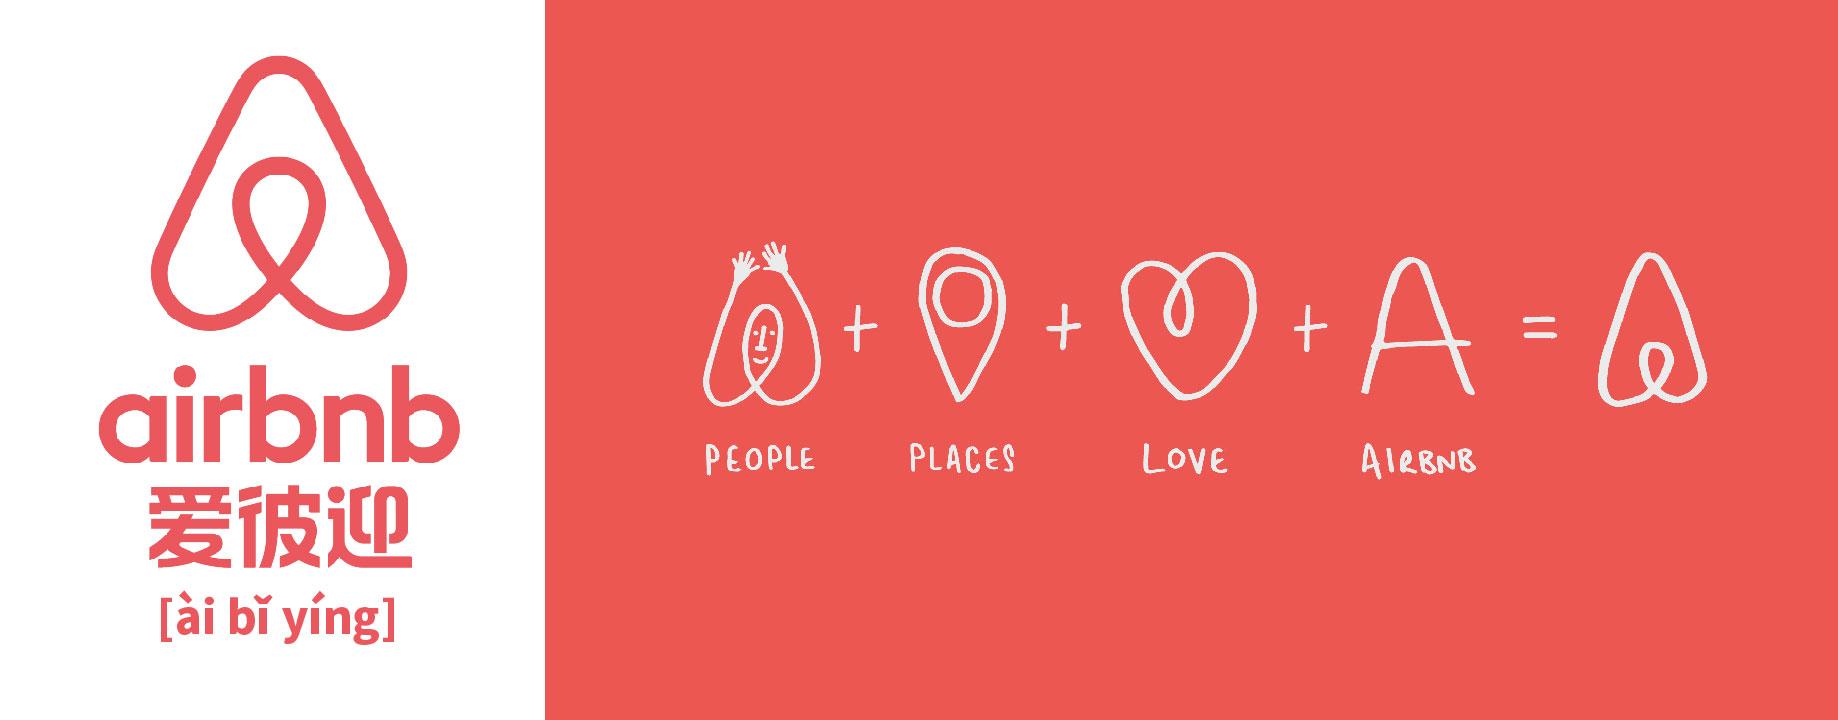 Brand Naming in China: Airbnb